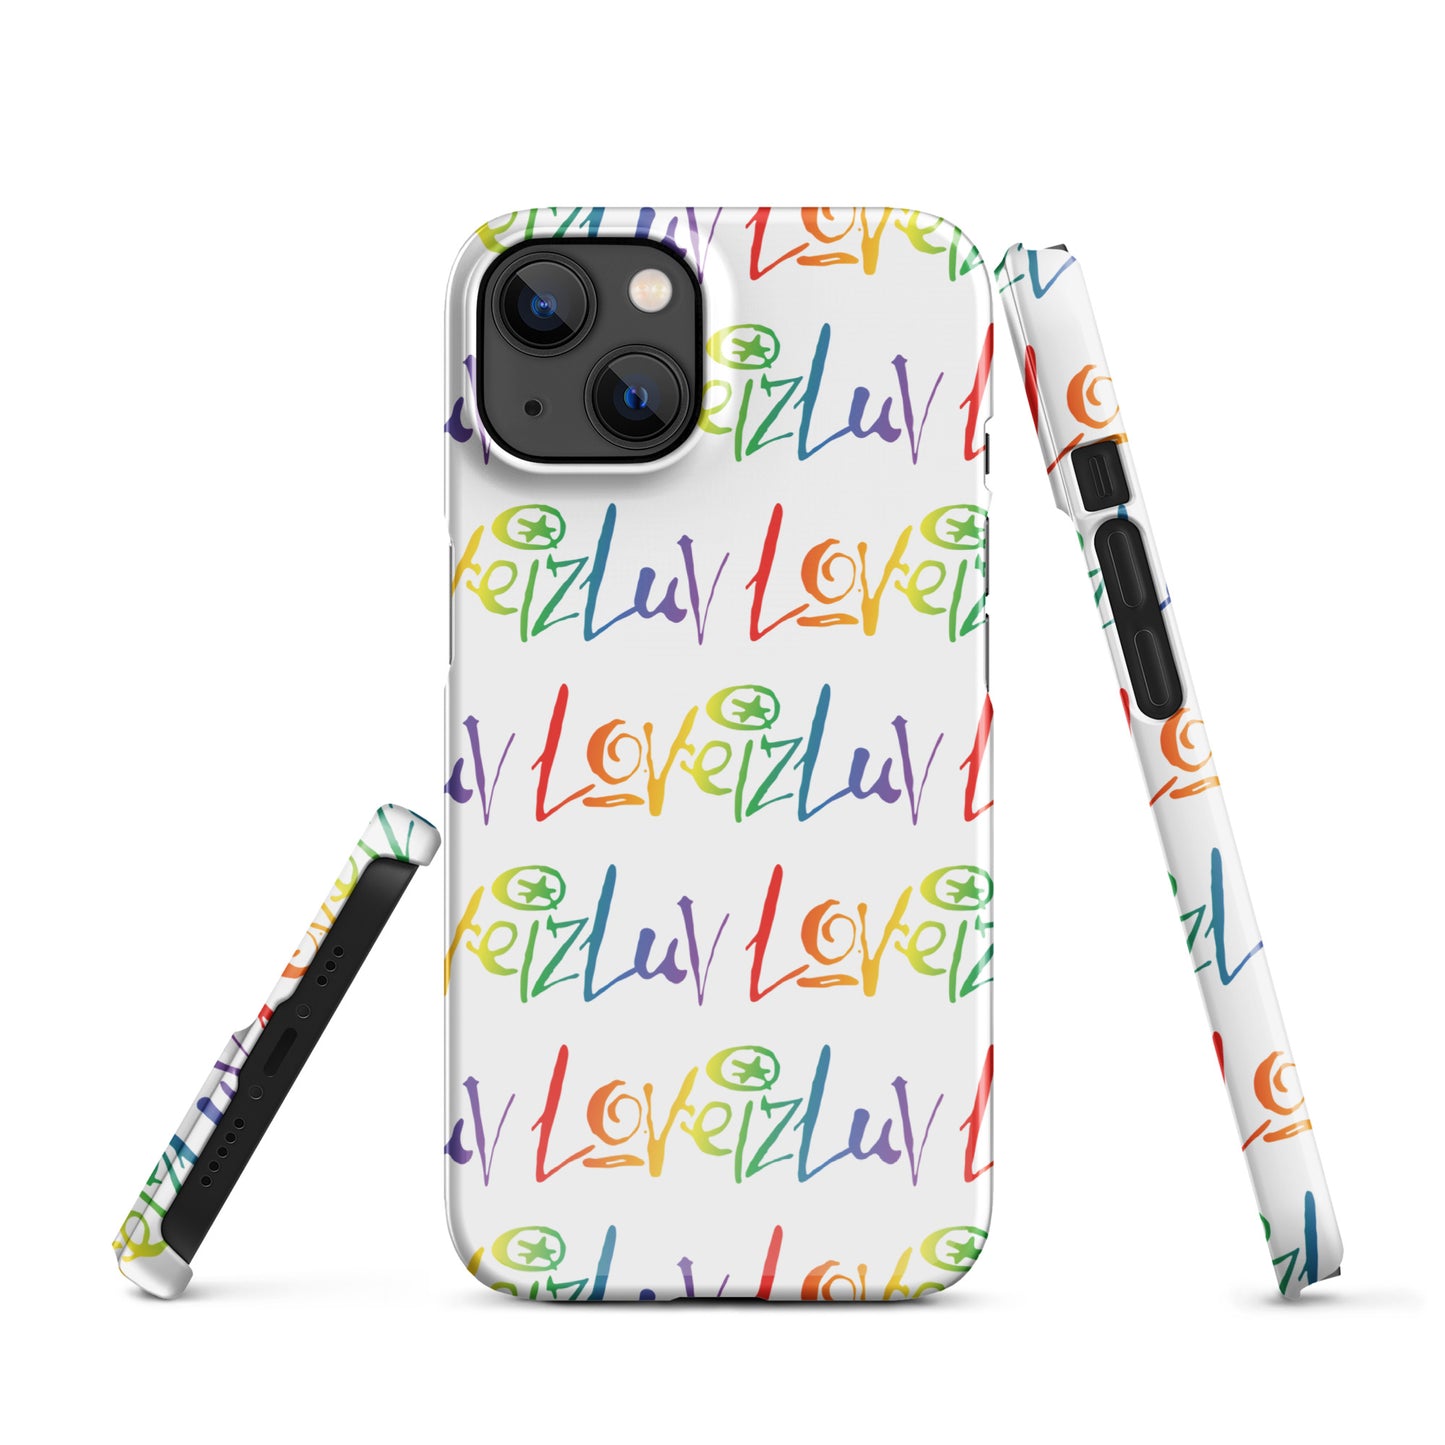 LoveizLuv Snap case for iPhone®